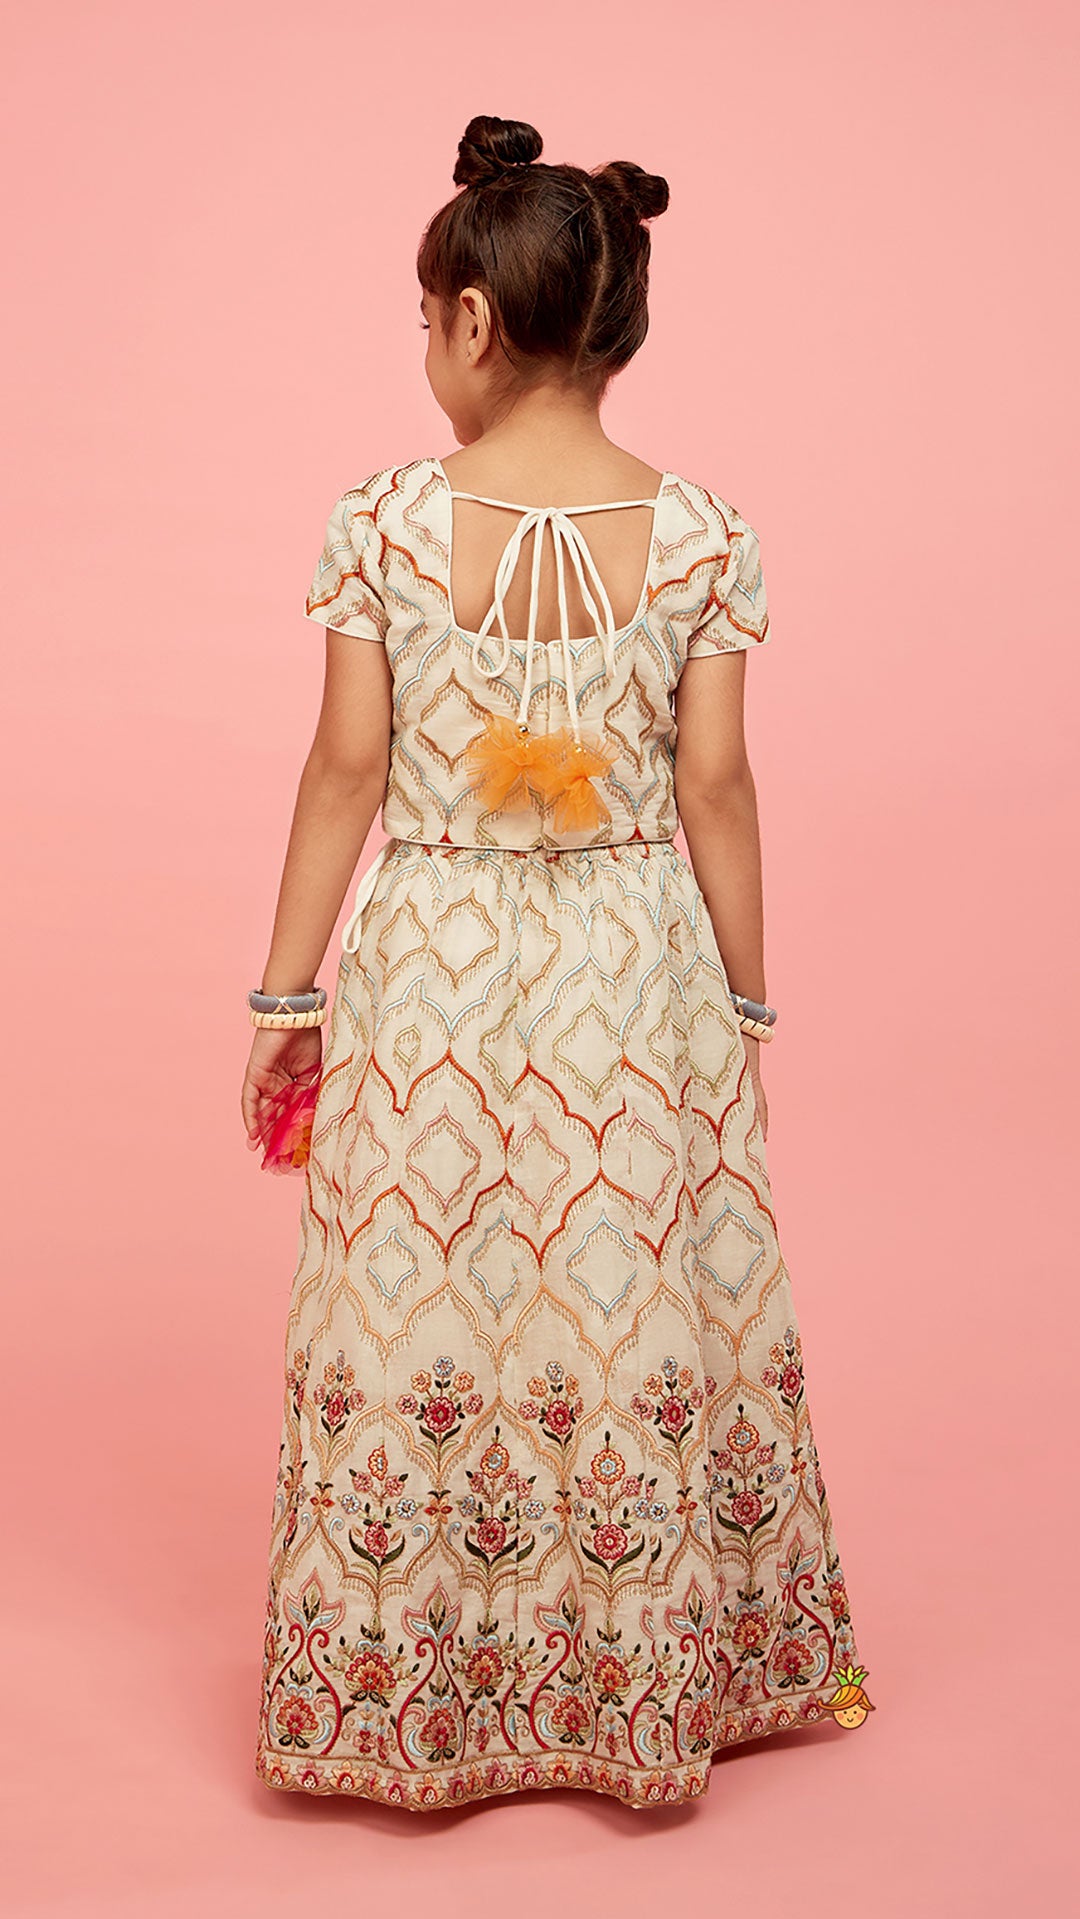 Pre Order: Short Sleeves Off White Top And Flower Tassels Detail Lehenga With Matching Dupatta